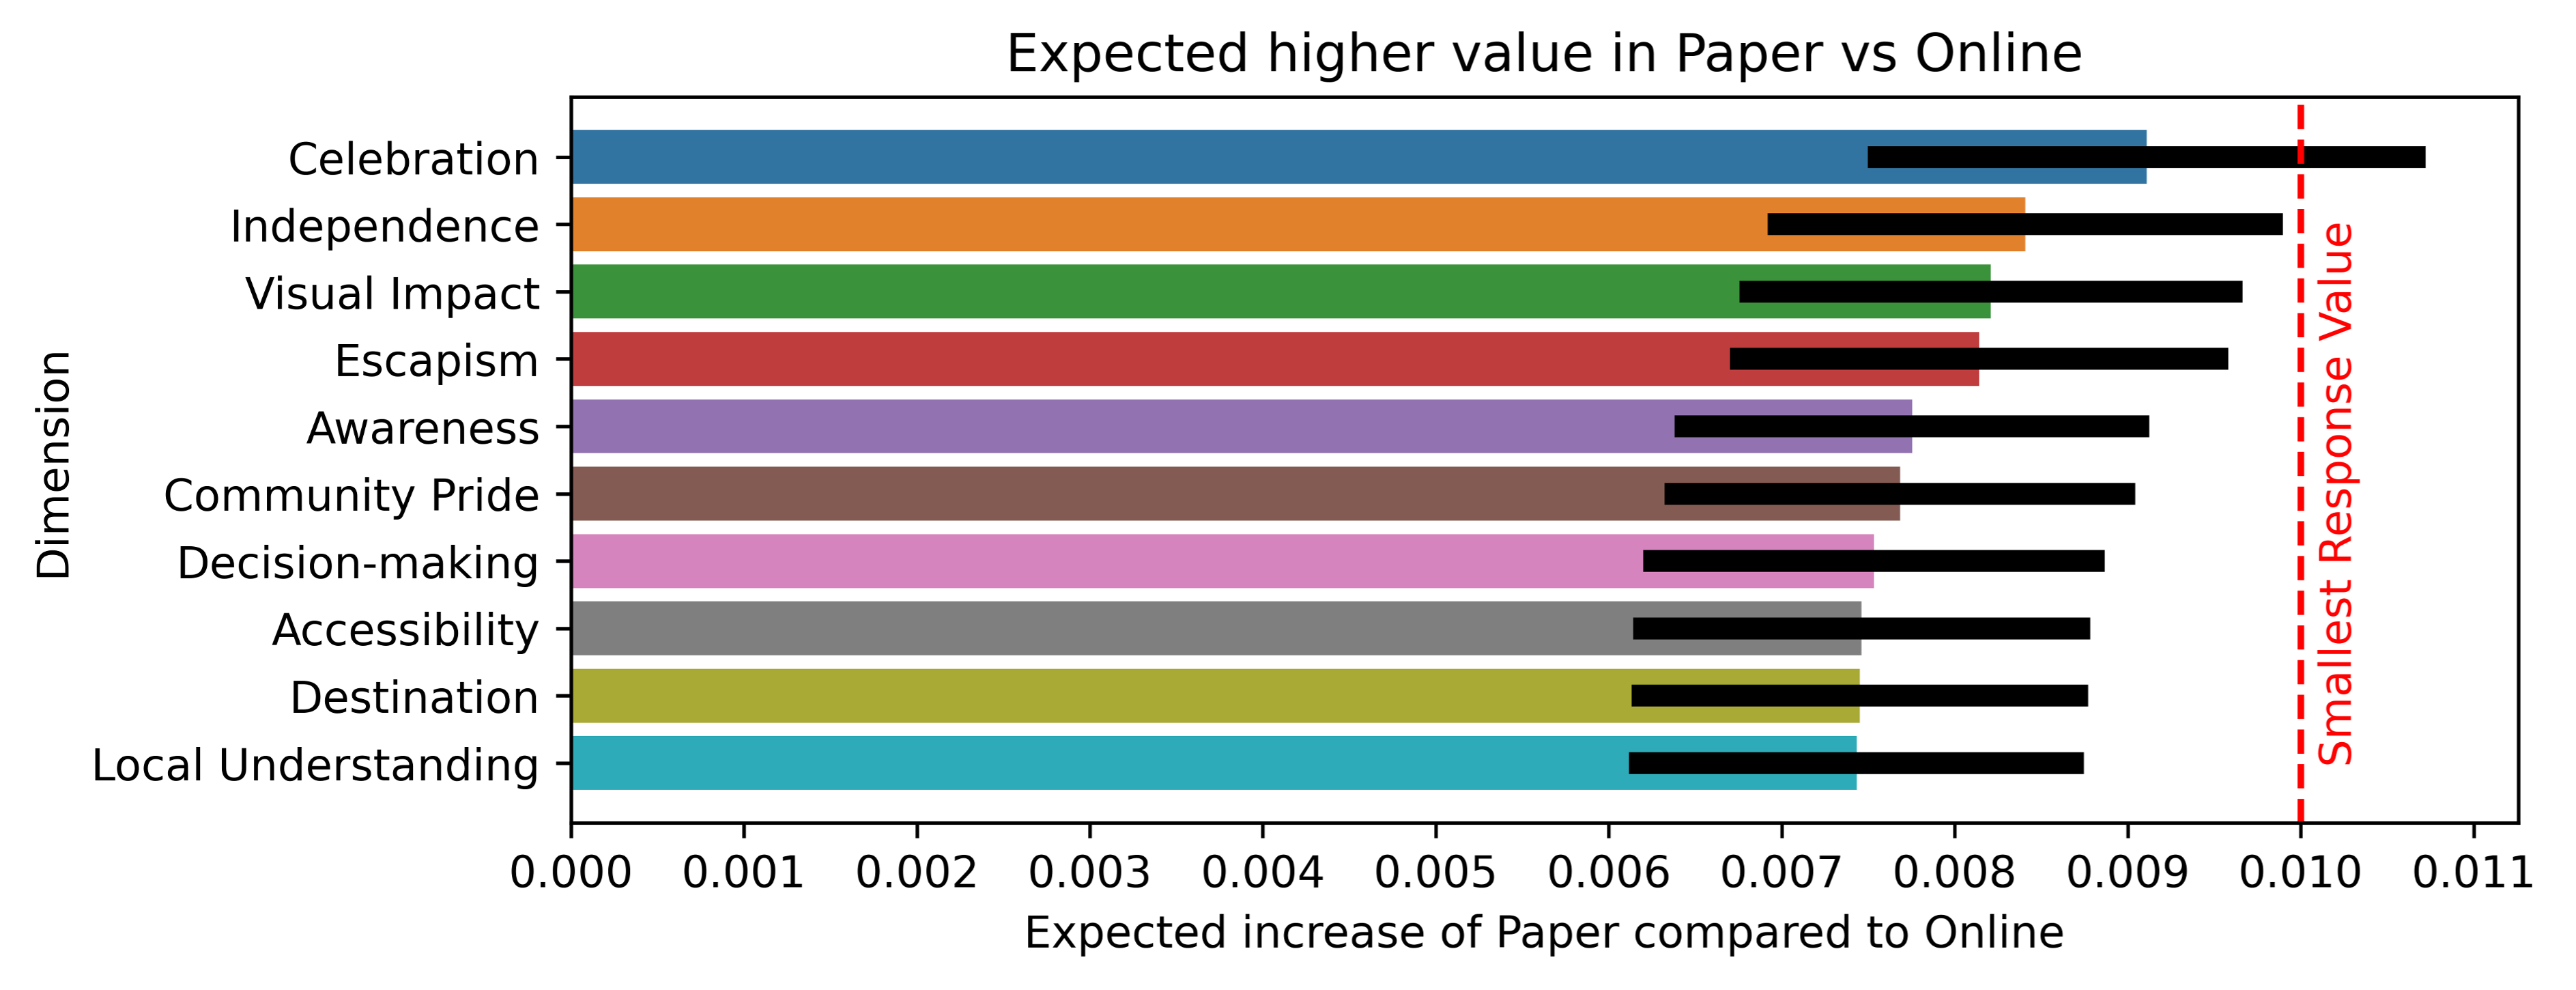 A bar chart which shows the expected difference in value between paper and online delivery methods. It shows that only the Celebration dimension has the potential to be over 0.01